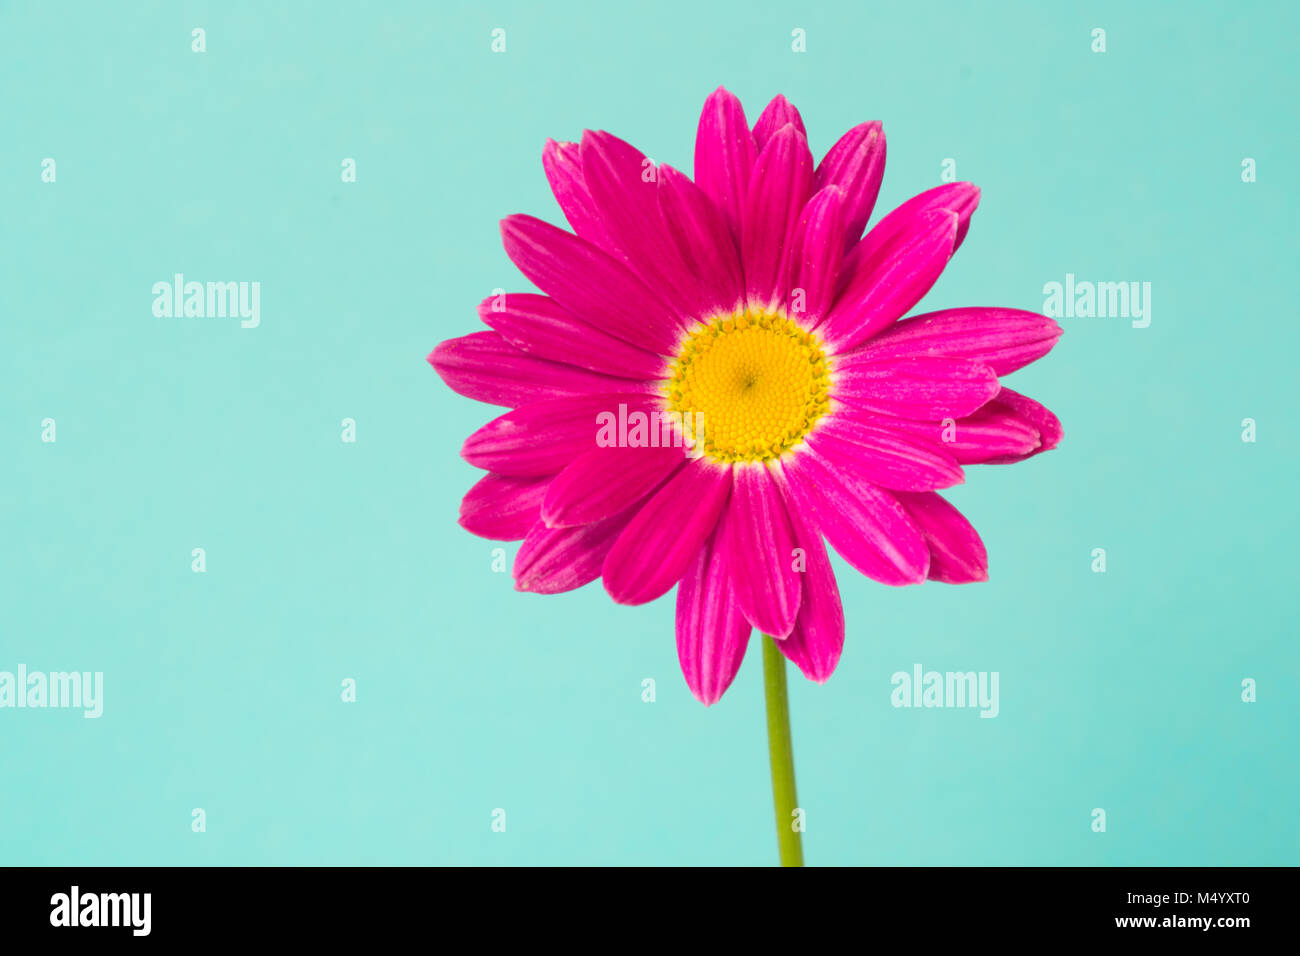 Pink pyrethrum flowers on blue background. Pink daisy. Close up. Copy space. Stock Photo